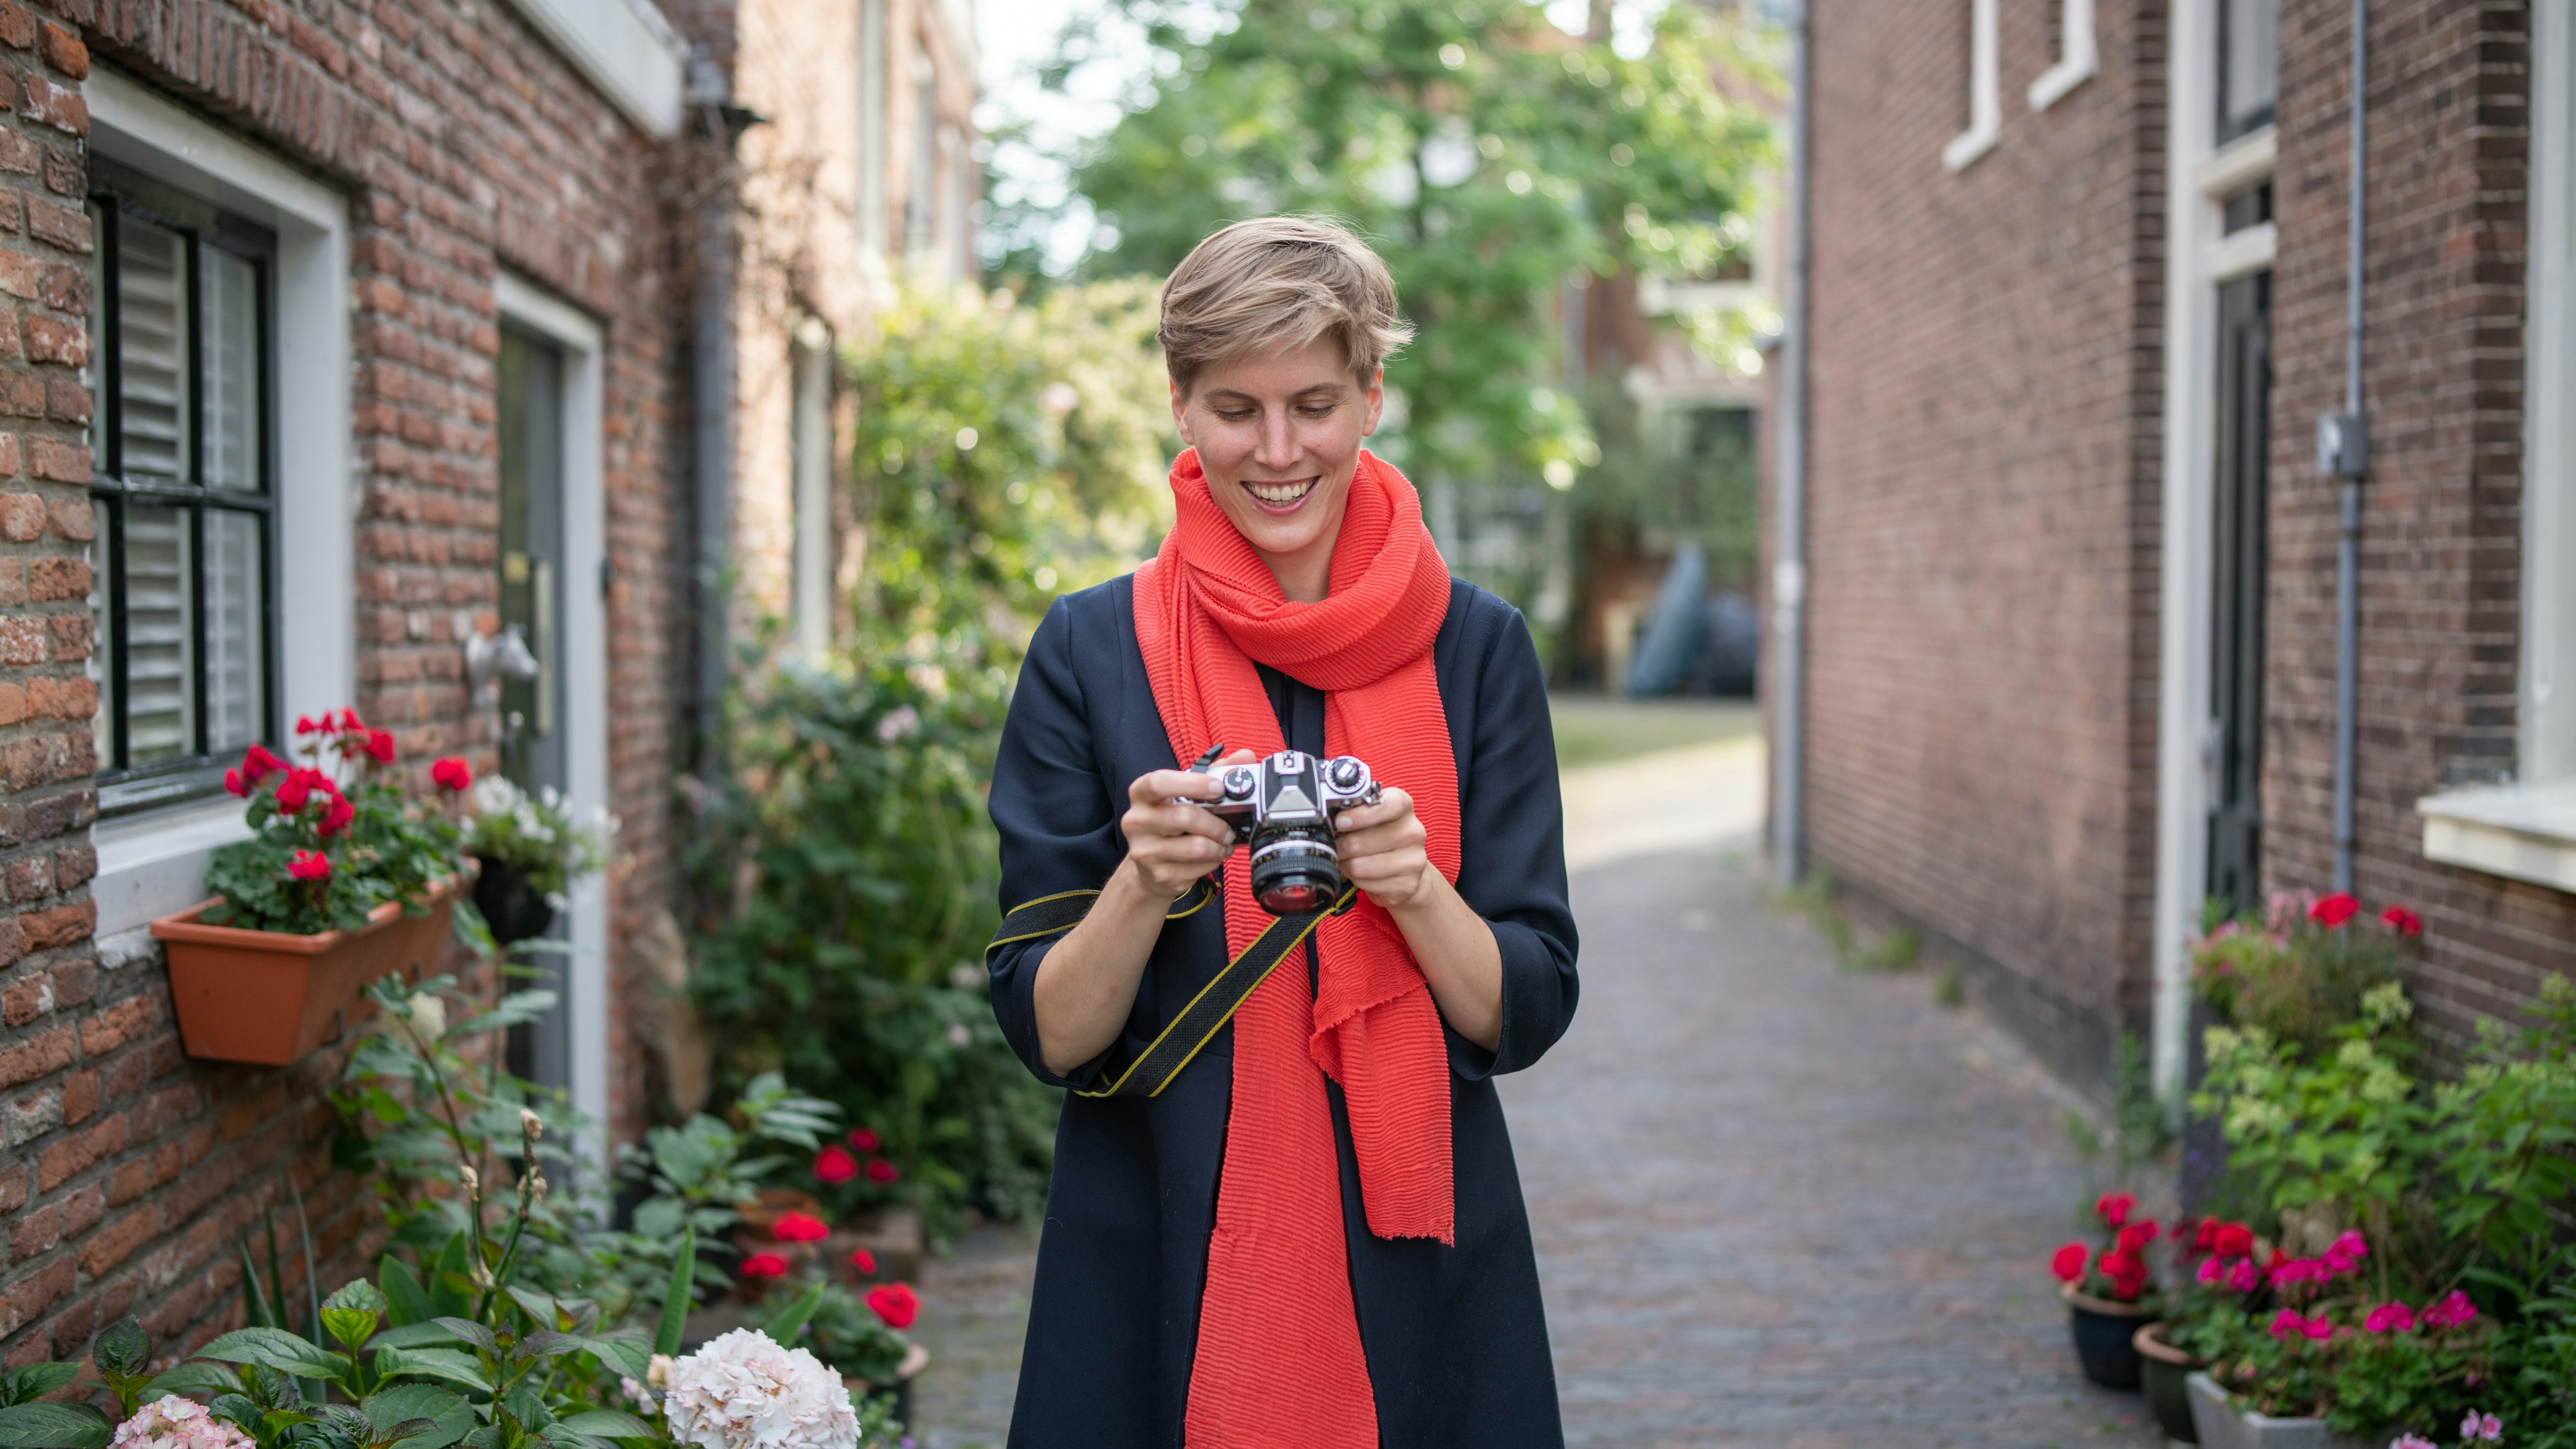 Annegret Bönemann, wearing a bright red scarf, looking down at an analog camera, situated in the streets of an old town.